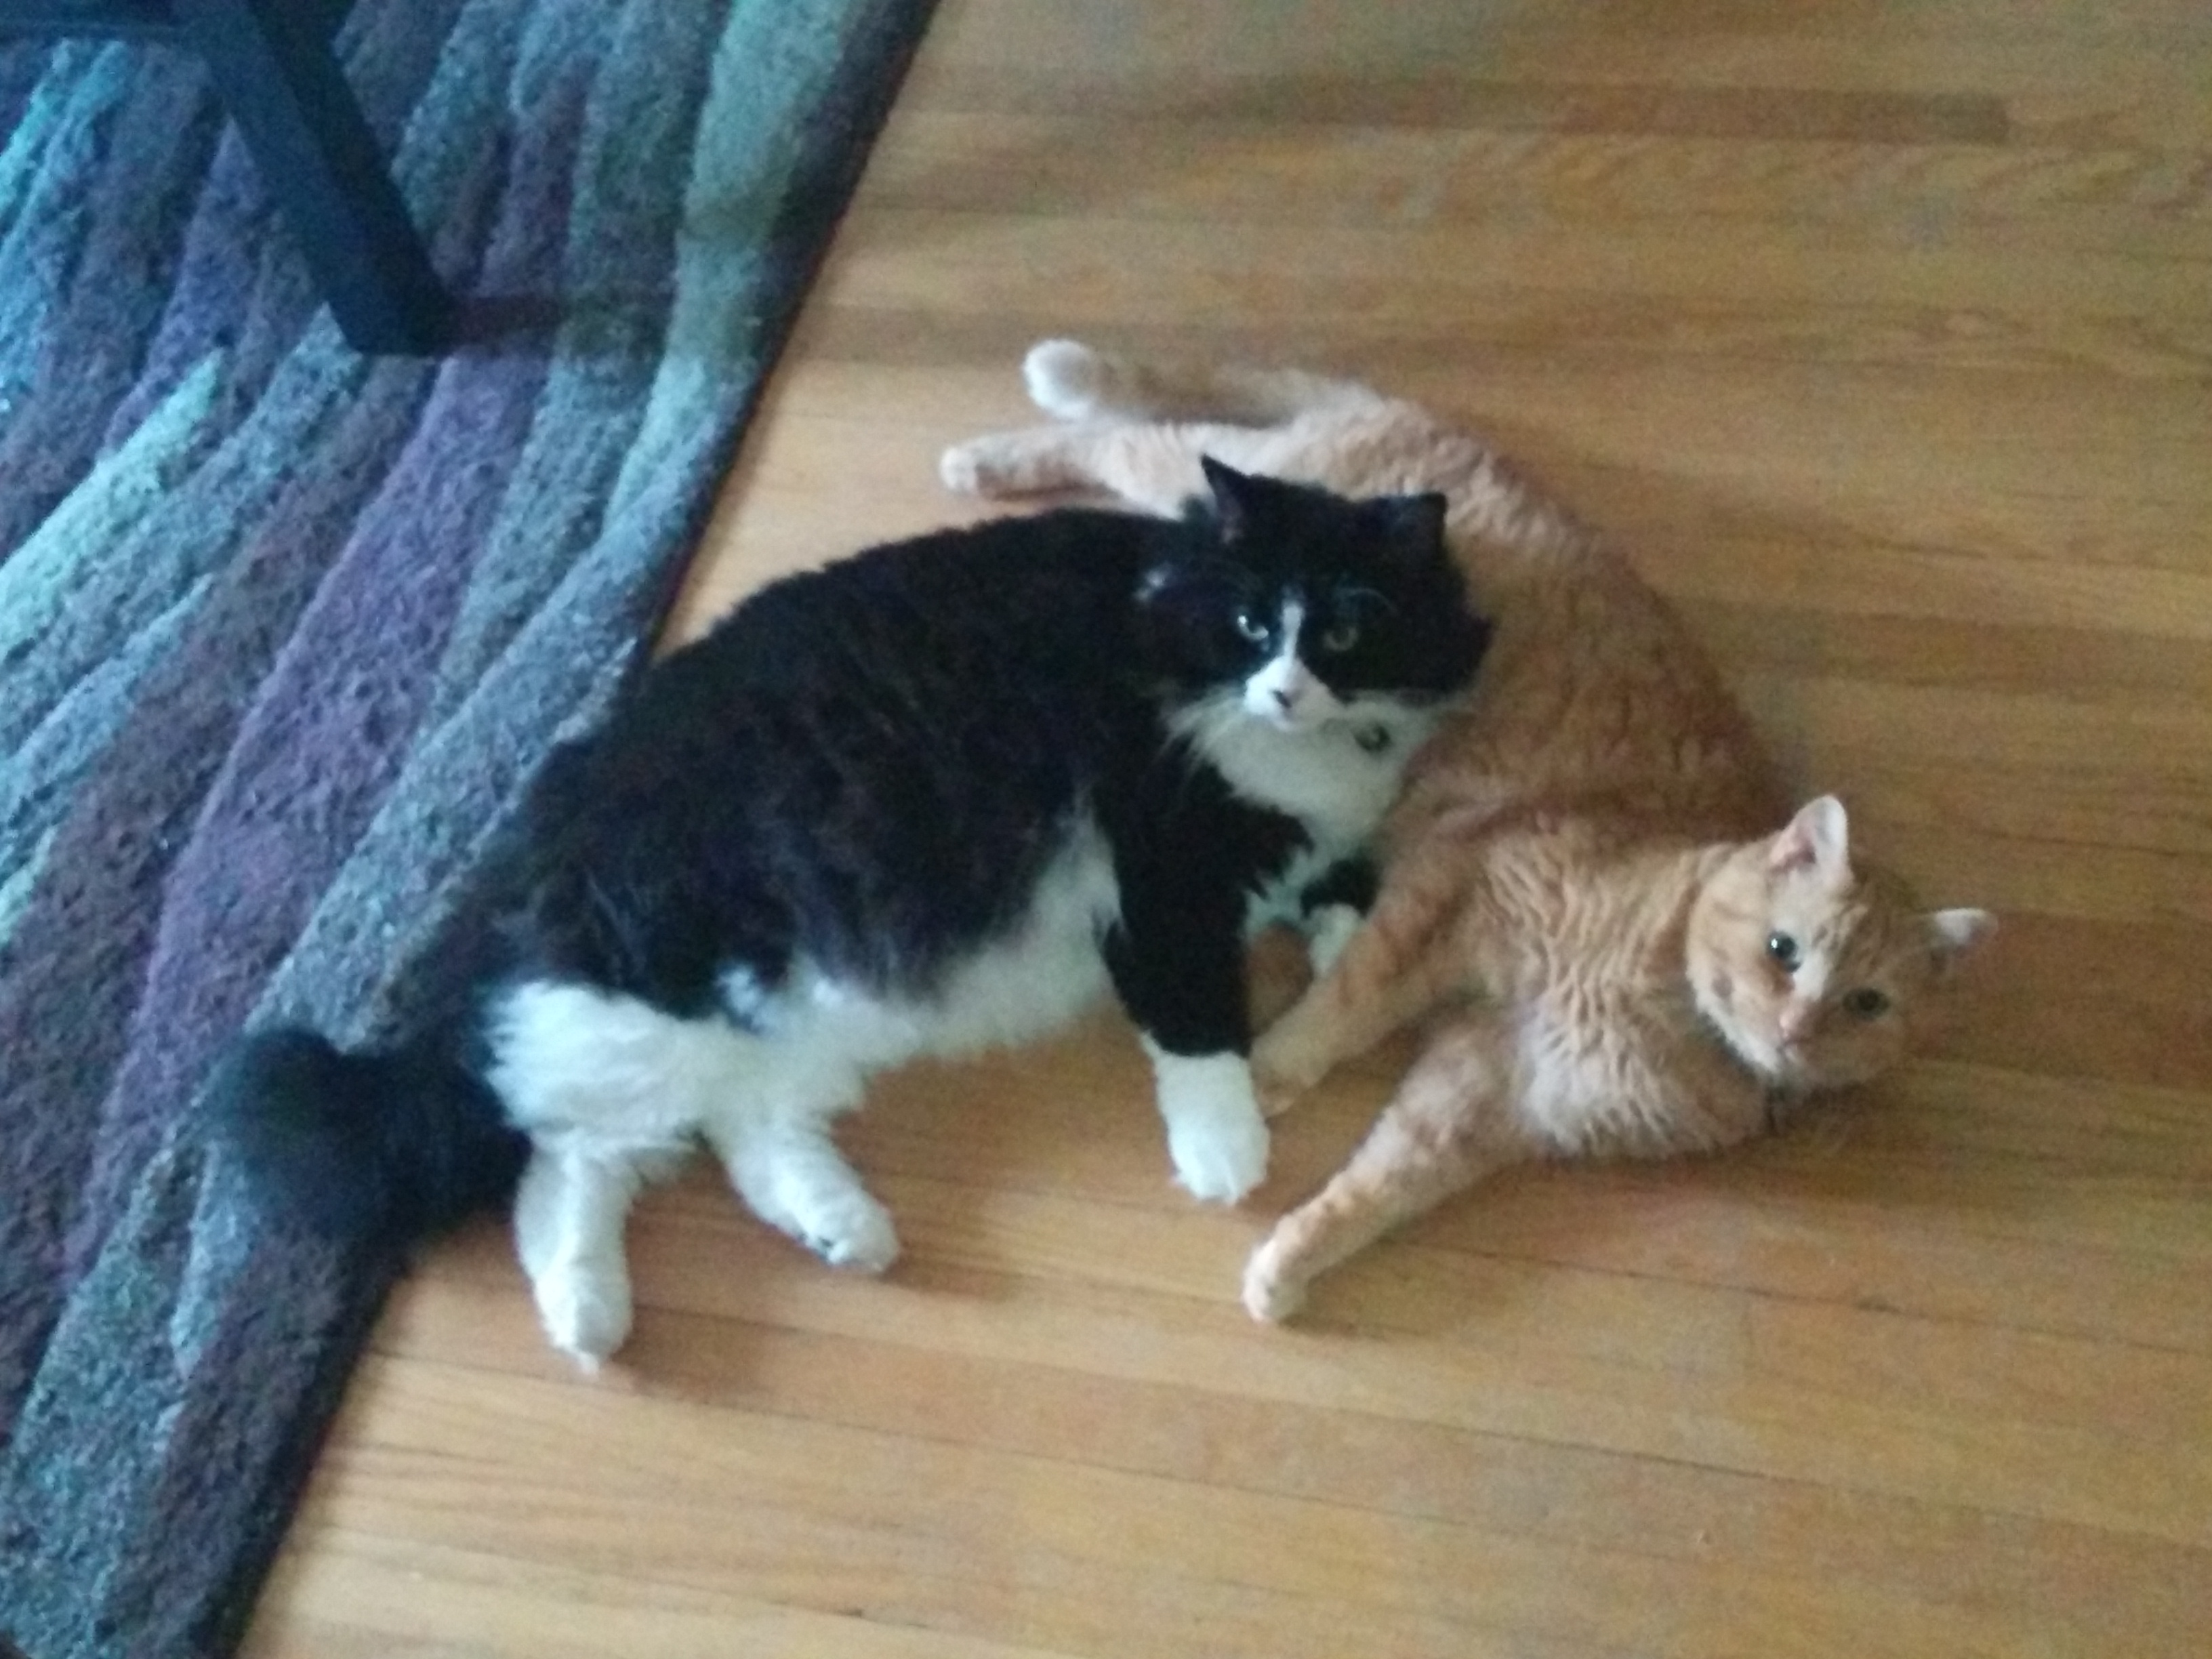 Jack, an orange tabby, and Nikita, a black and white tuxedo, cuddling together on the floor.